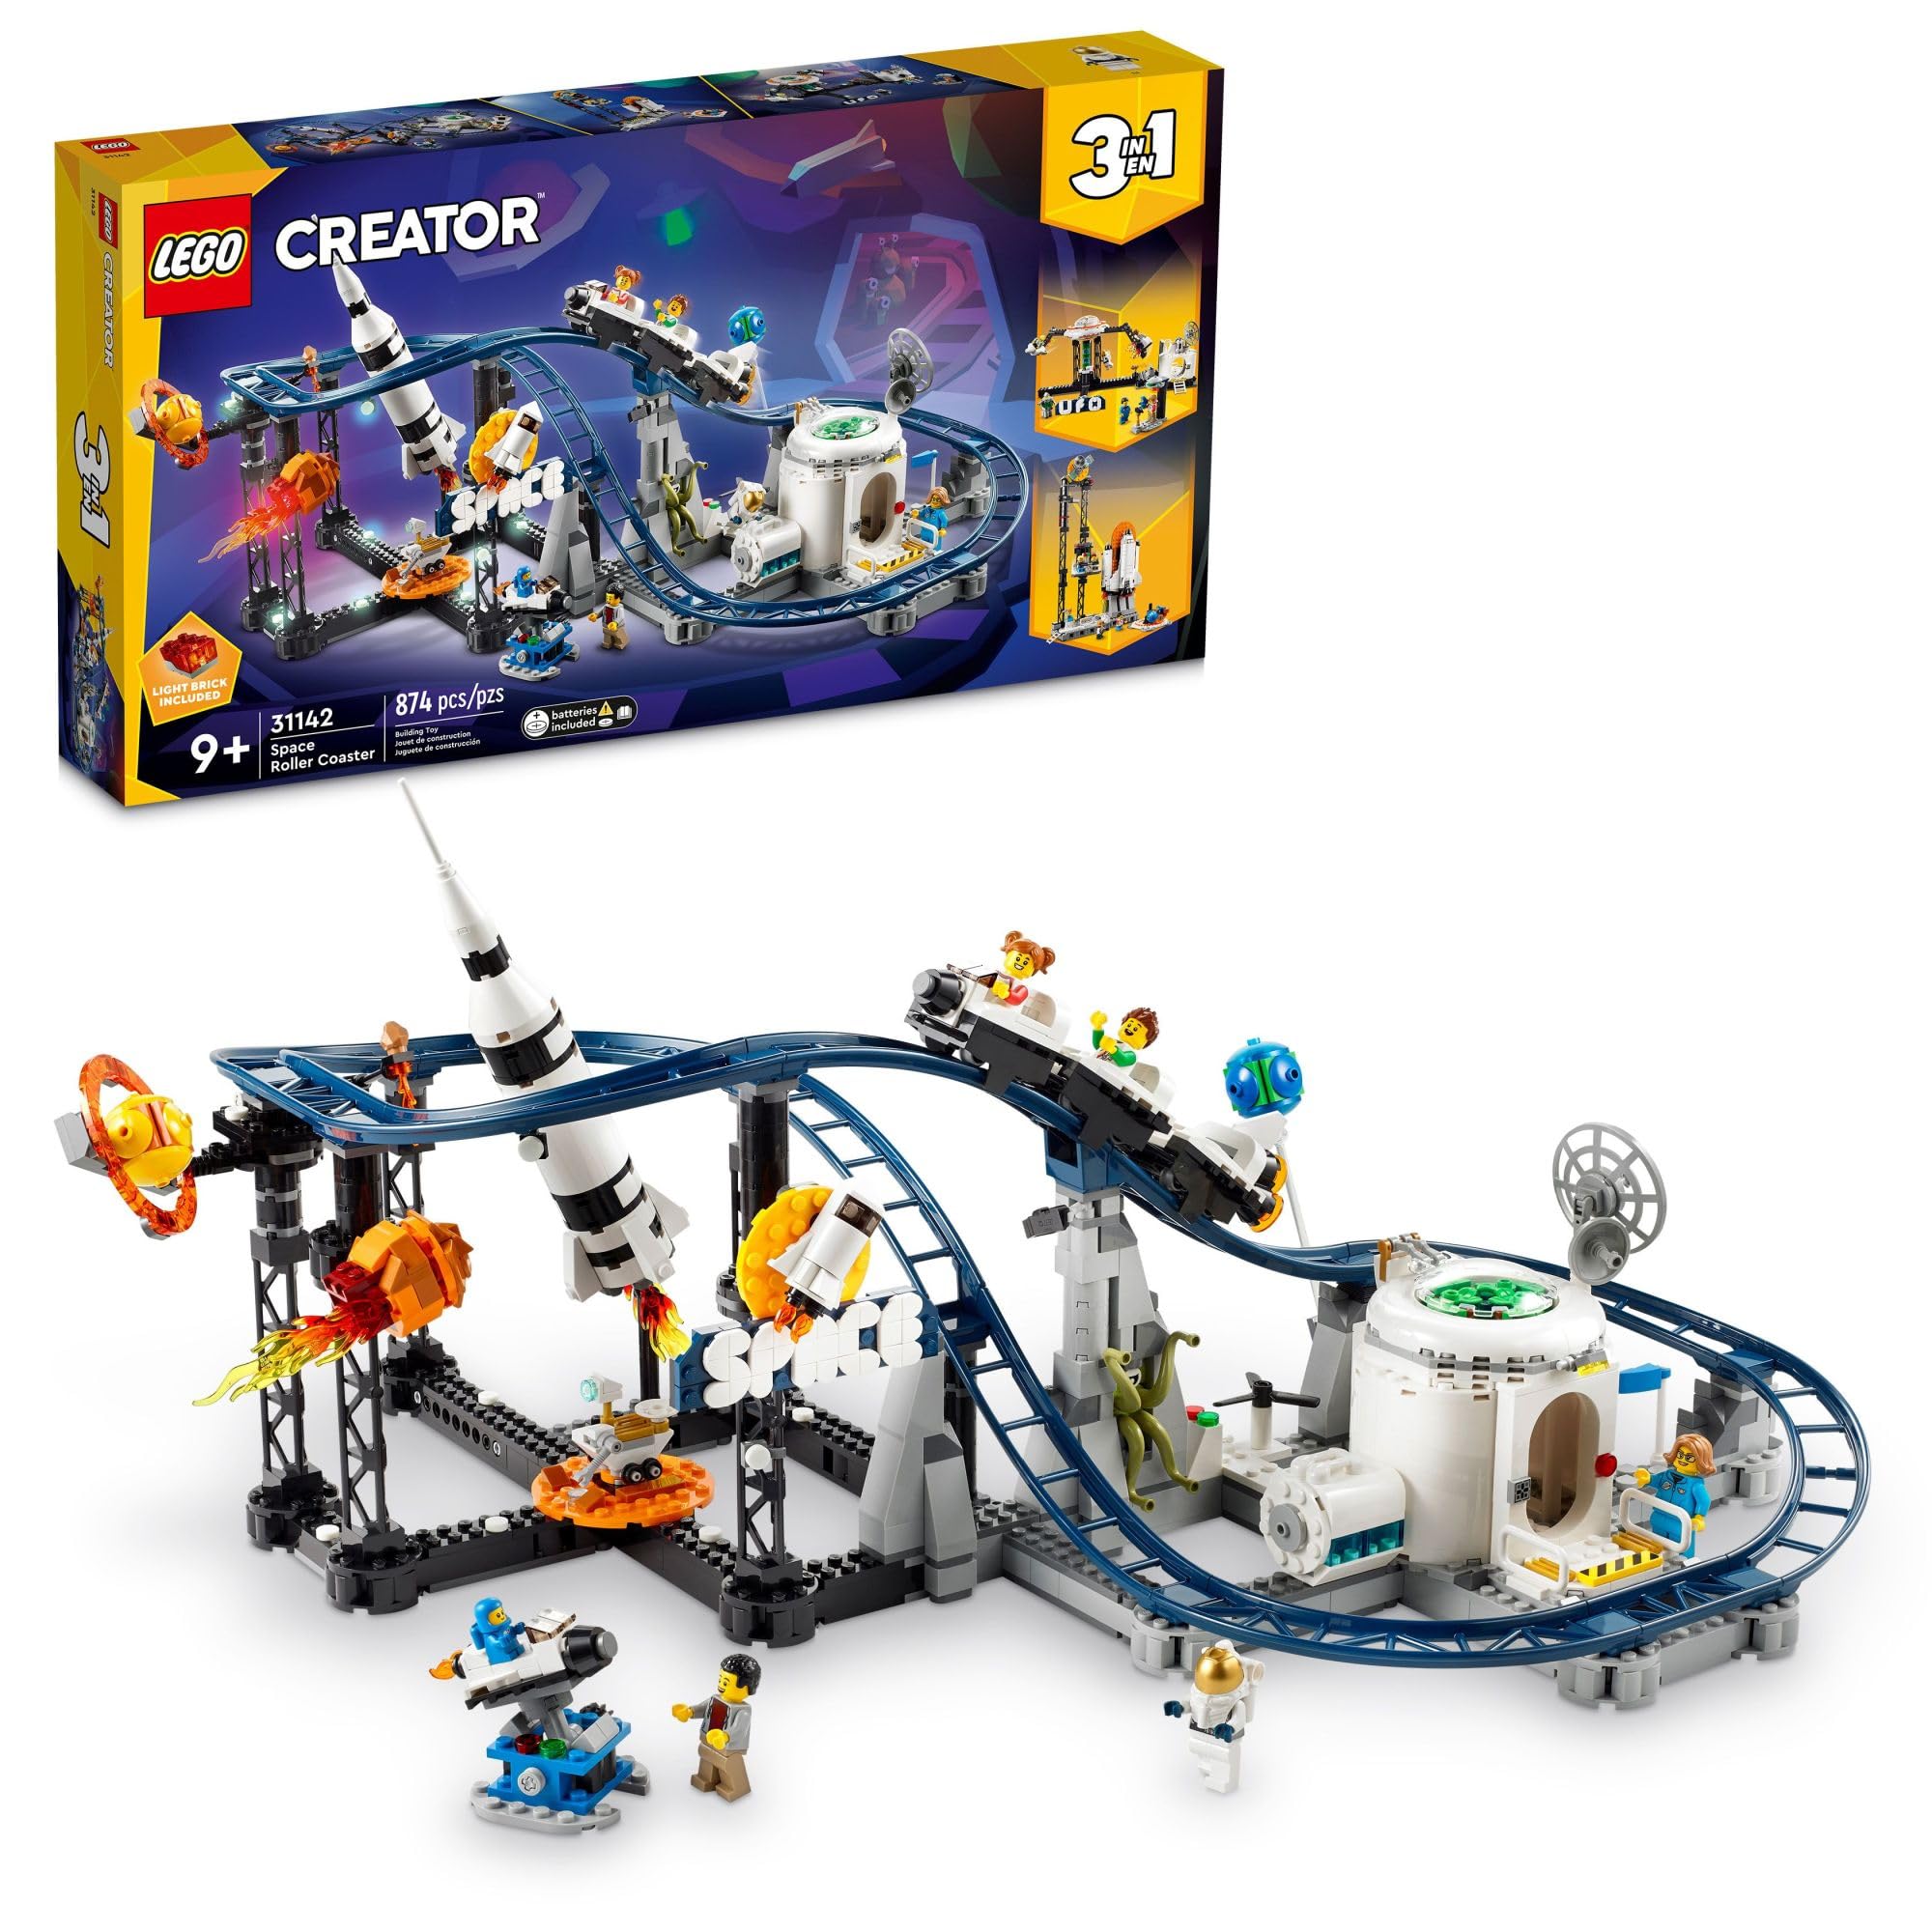 LEGO Creator Space Roller Coaster 31142 3 in 1 Building Toy Set Featuring a Roller Coaster, Drop Tower or Carousel Plus 5 Minifigures, Rebuildable Amusement Park Christmas Toy for Kids Ages 9 and Up